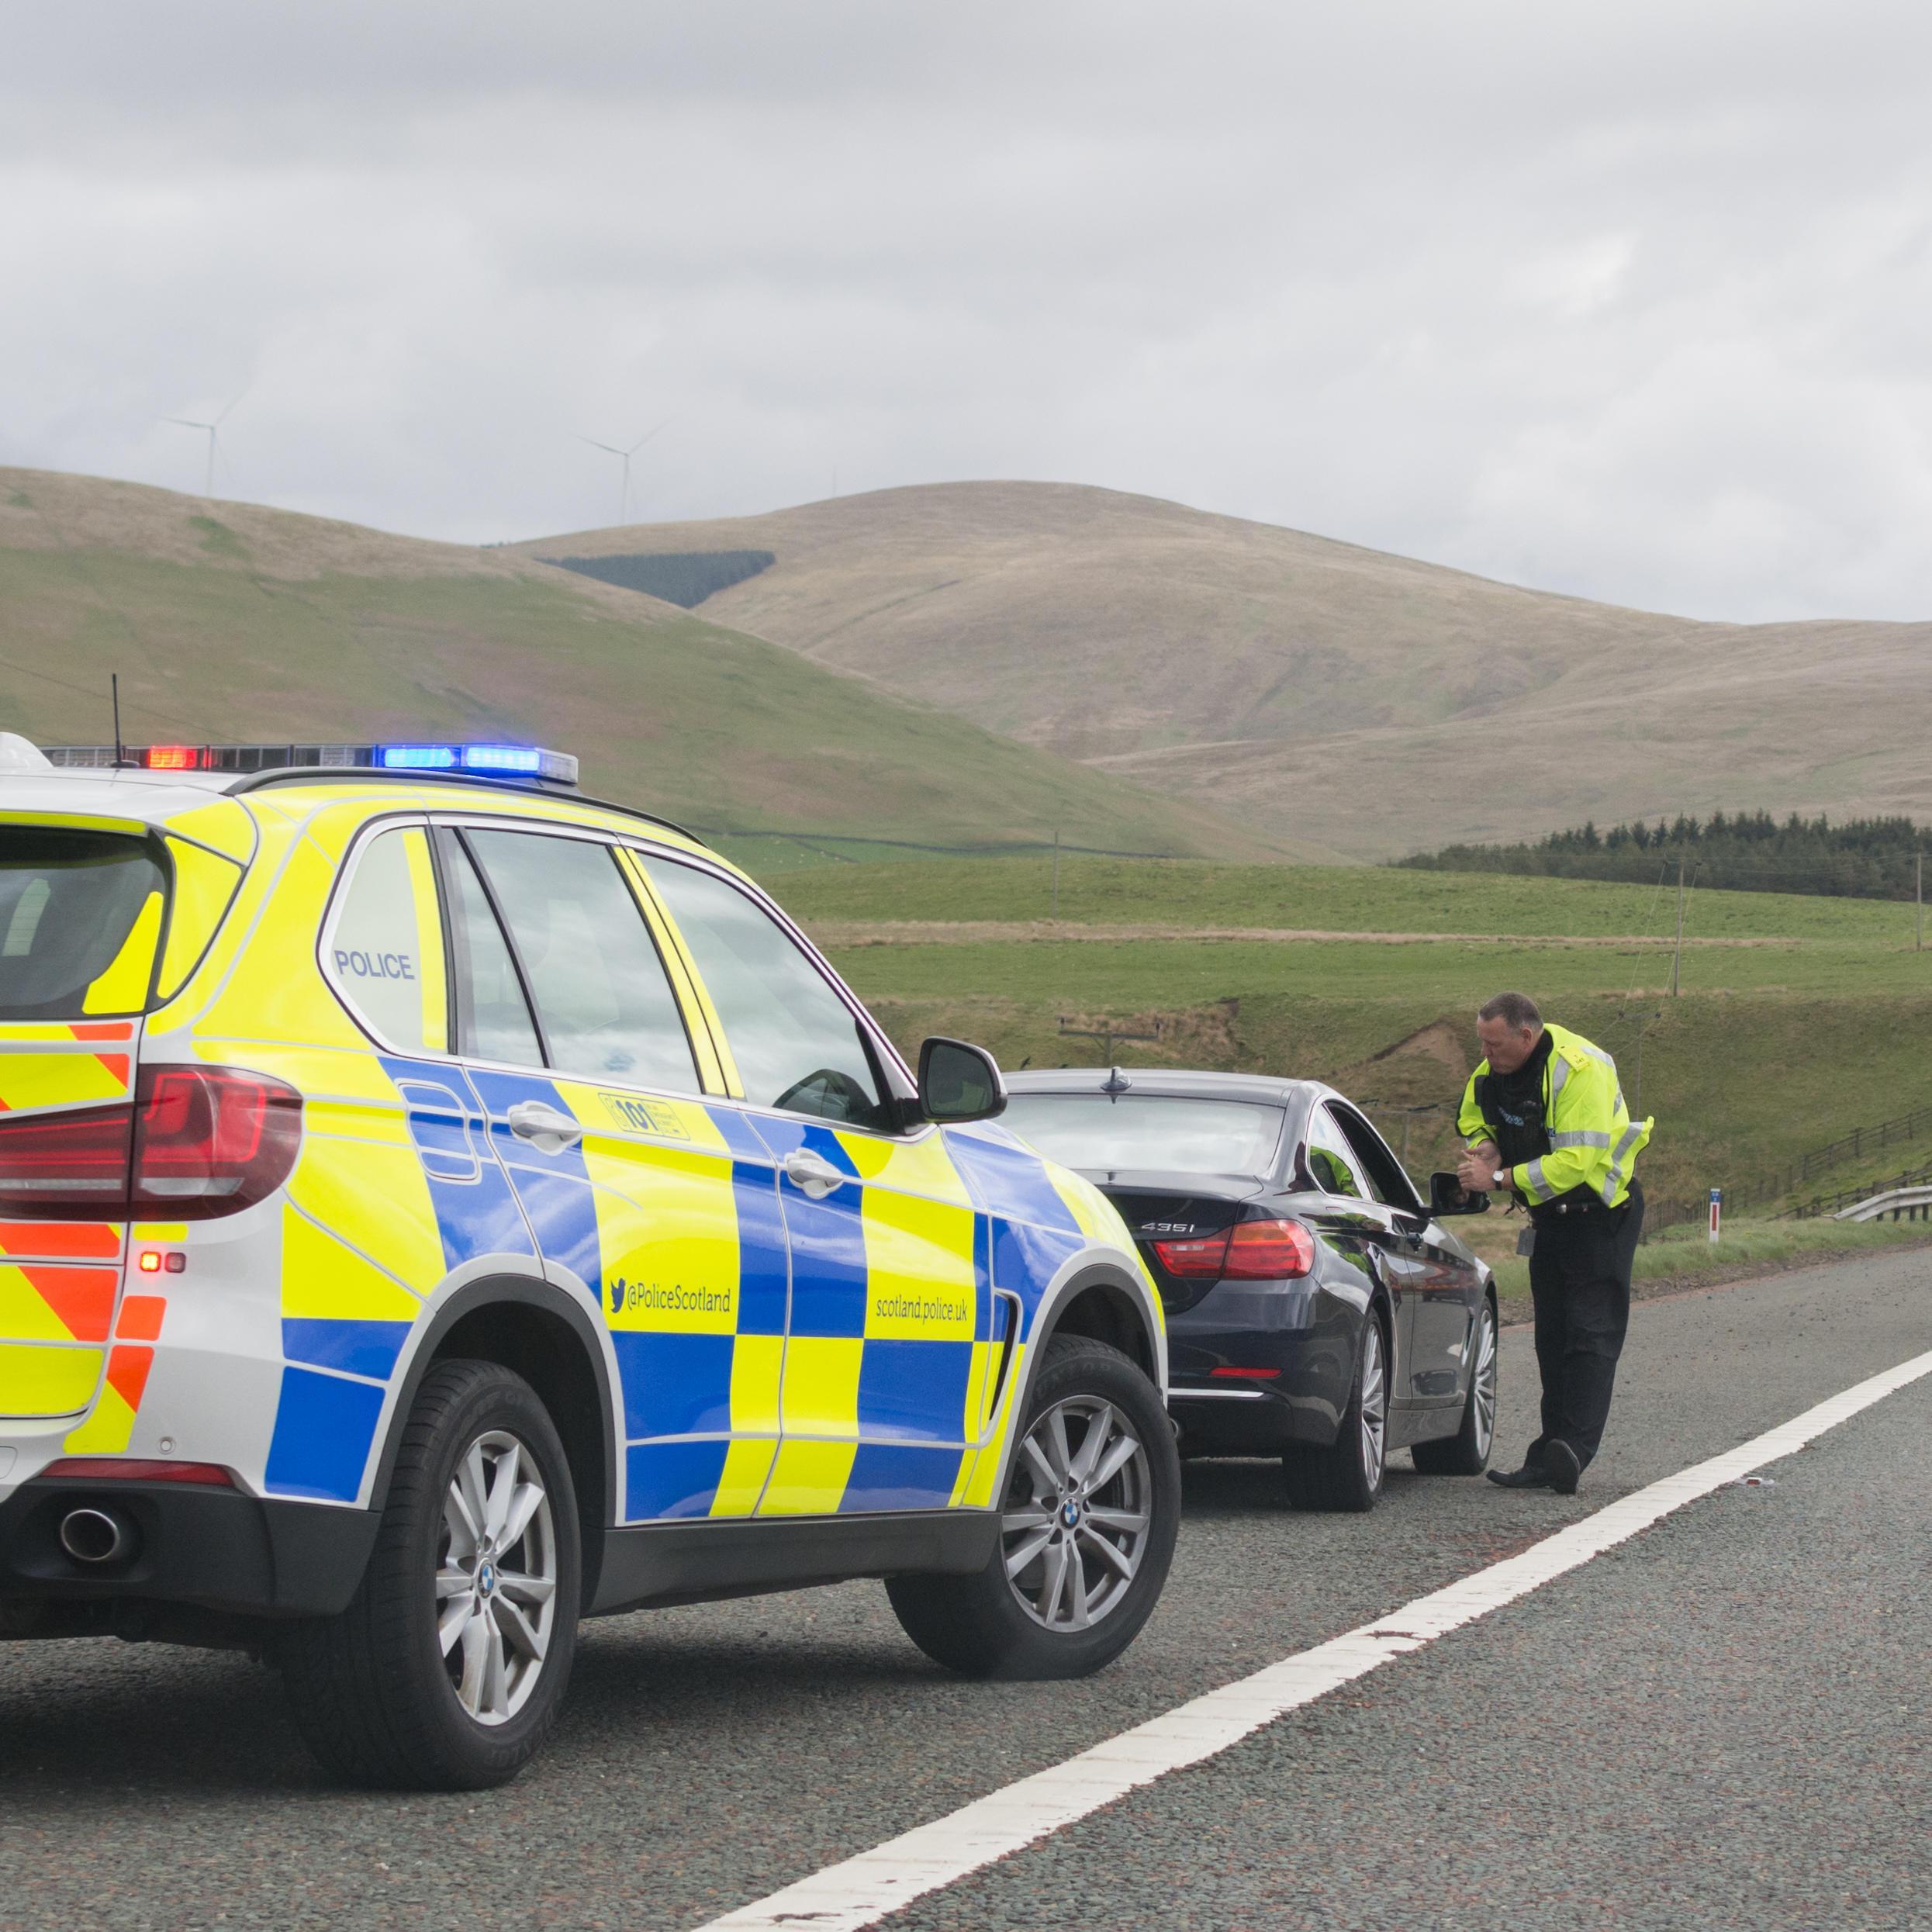 Drivers Could Face Fines of £130 for Minor Offences